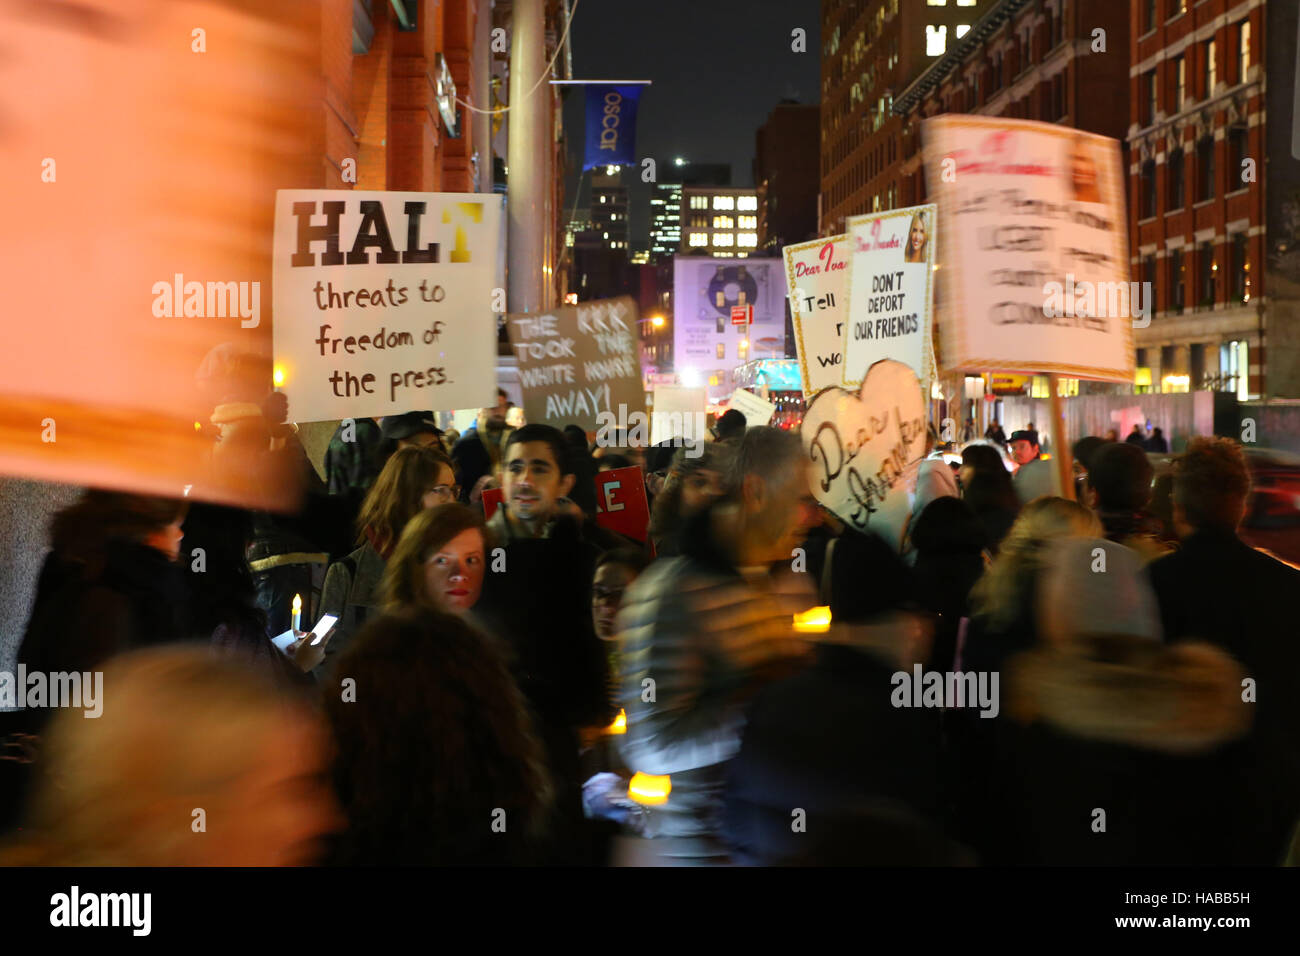 New York, USA. 28th November, 2016. Artists, and activists hold a candlelight vigil and demonstration outside the Puck Building owned by Jared Kushner.  Kushner is married to Donald Trump's daughter, Ivanka Trump, and activists want to send a message that racism, misogyny, and homophobia has no place anywhere, including the White House. Stock Photo